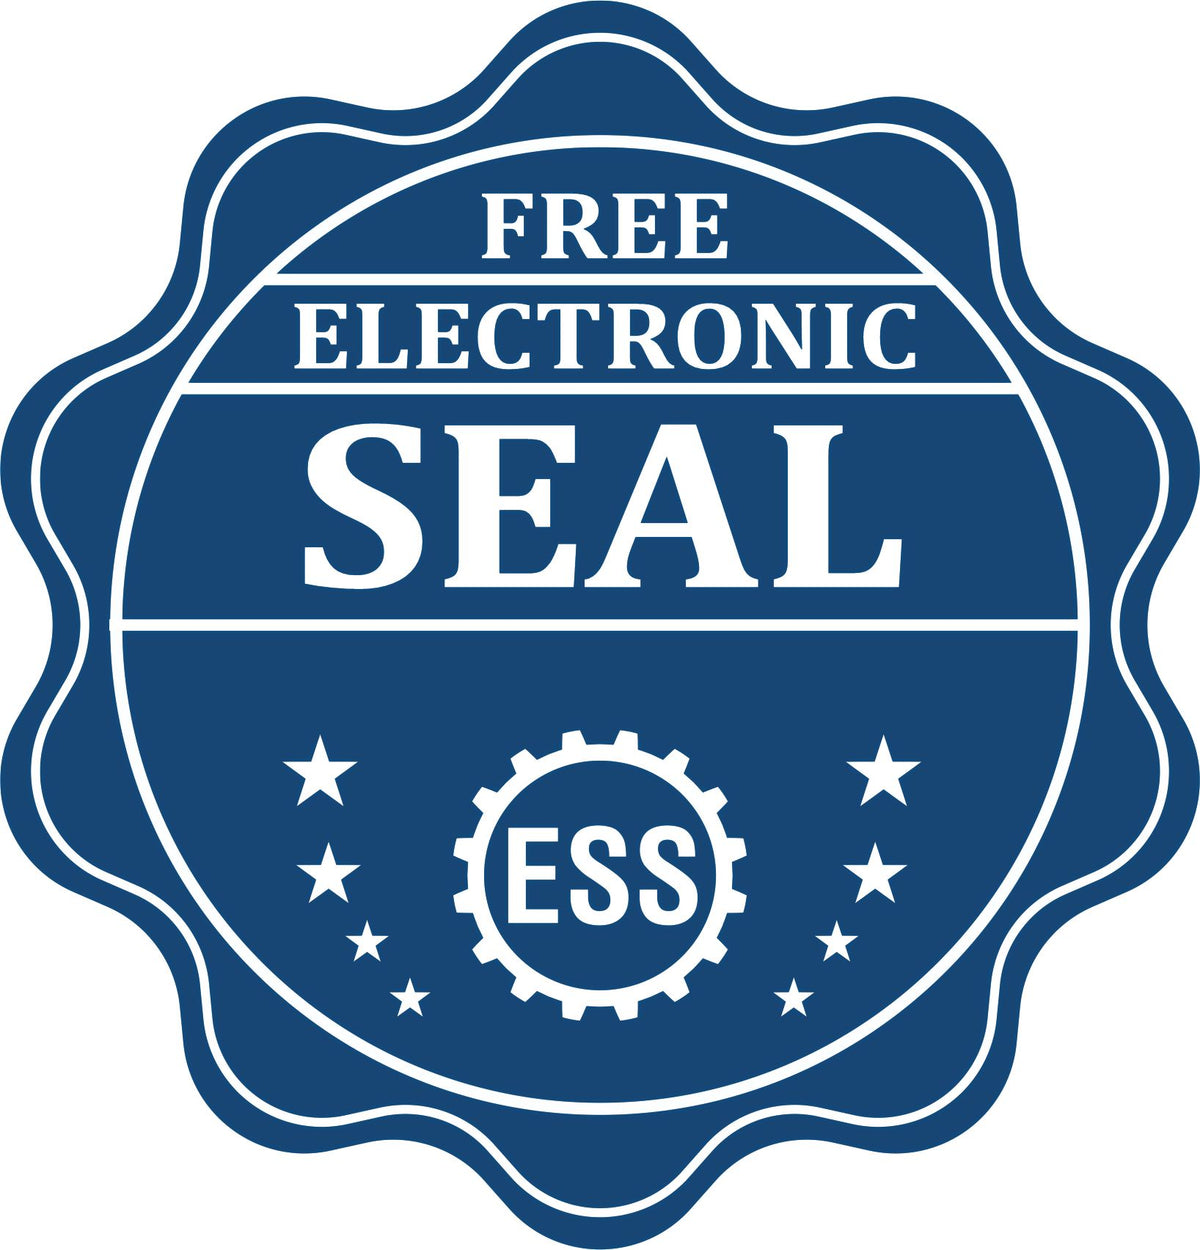 A badge showing a free electronic seal for the MaxLight Premium Pre-Inked Wisconsin State Seal Notarial Stamp with stars and the ESS gear on the emblem.